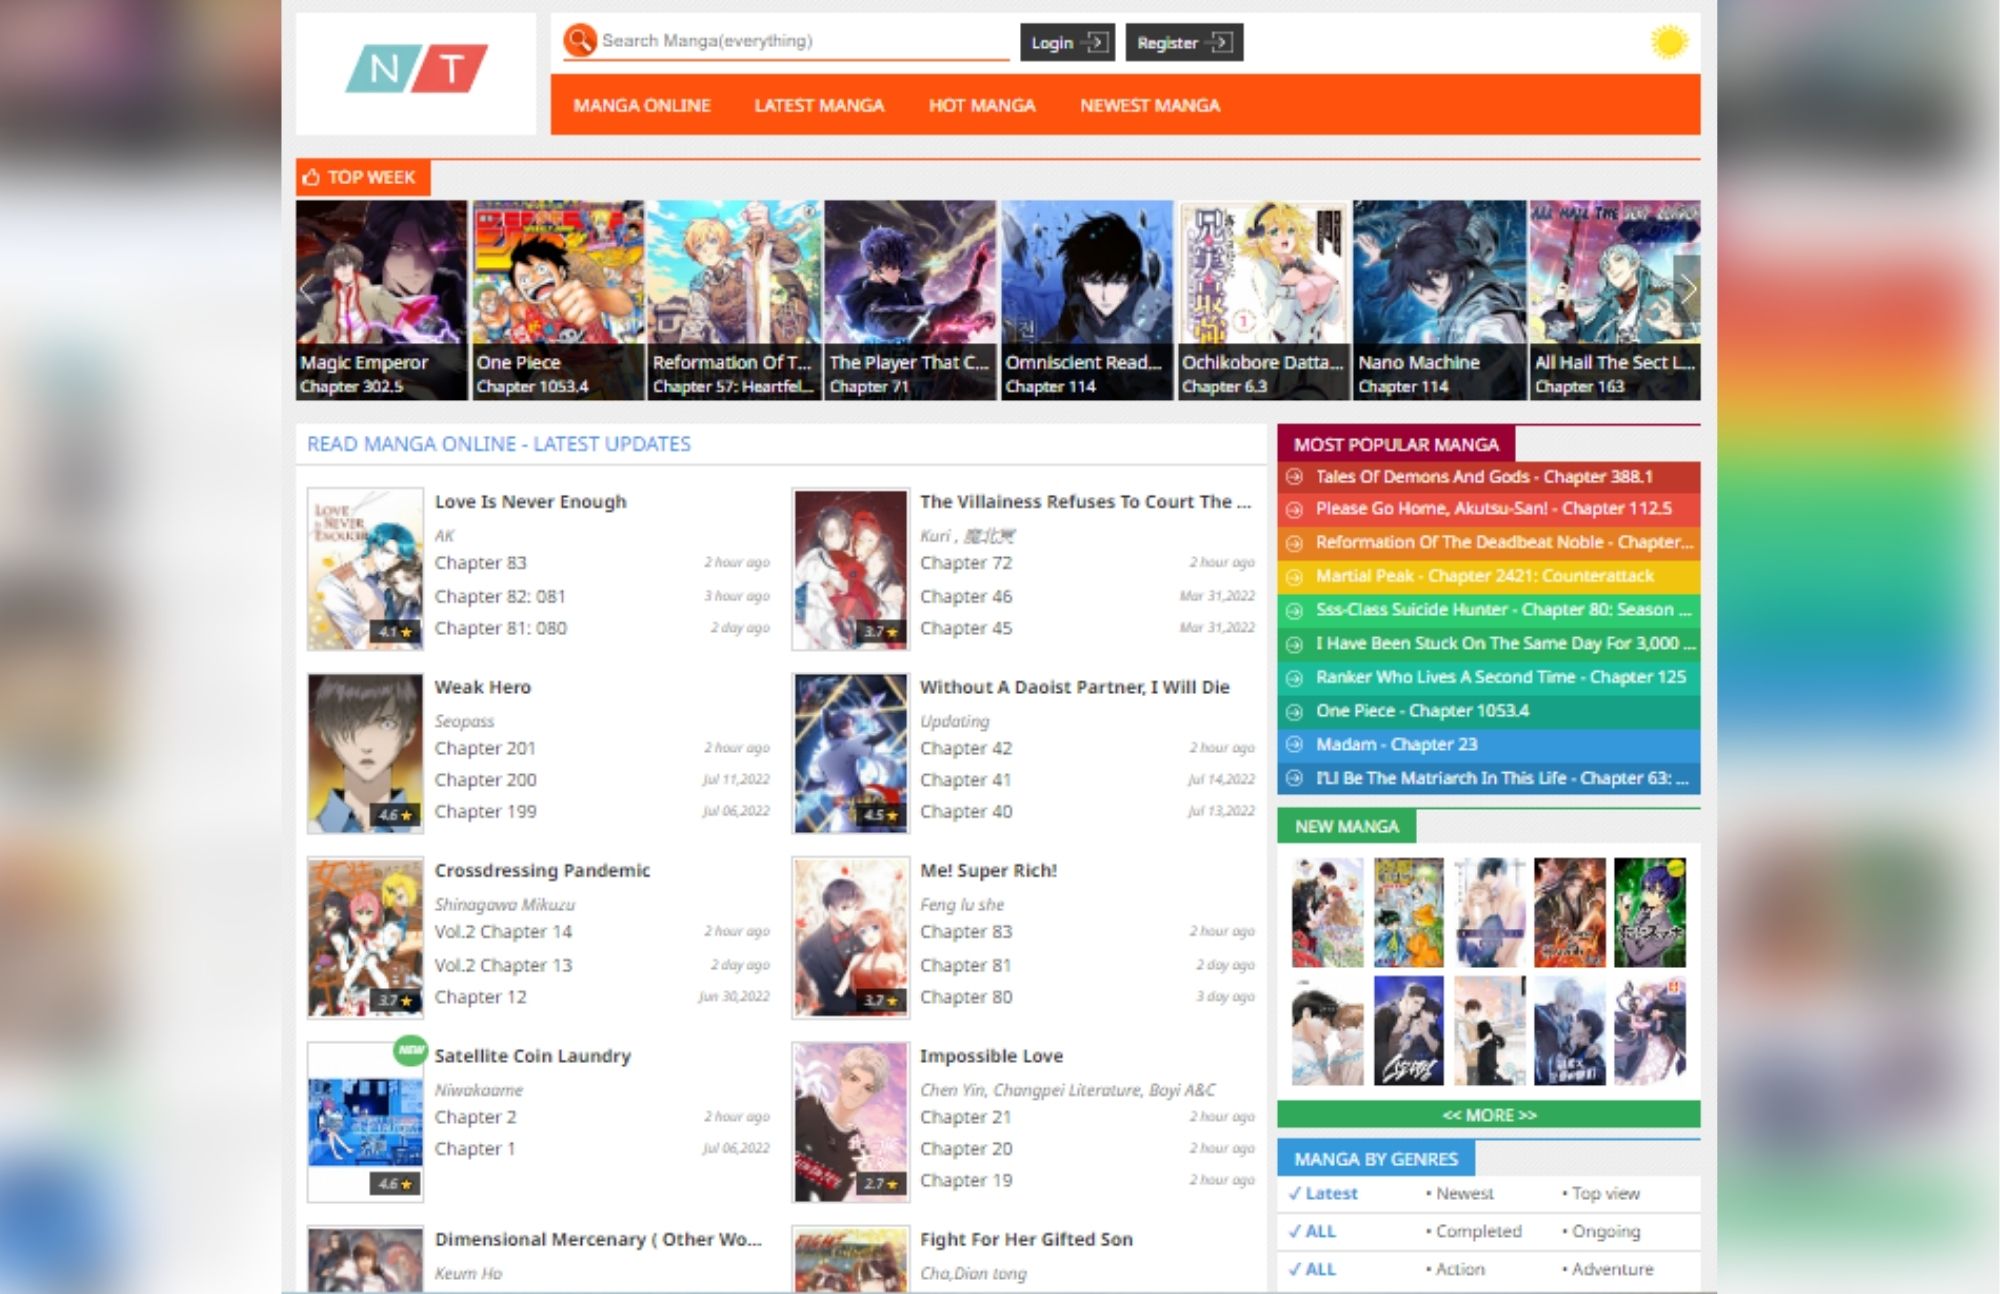 Manganato's homepage features the most recent manga updates, as well as the most popular manga on the right sidebar.